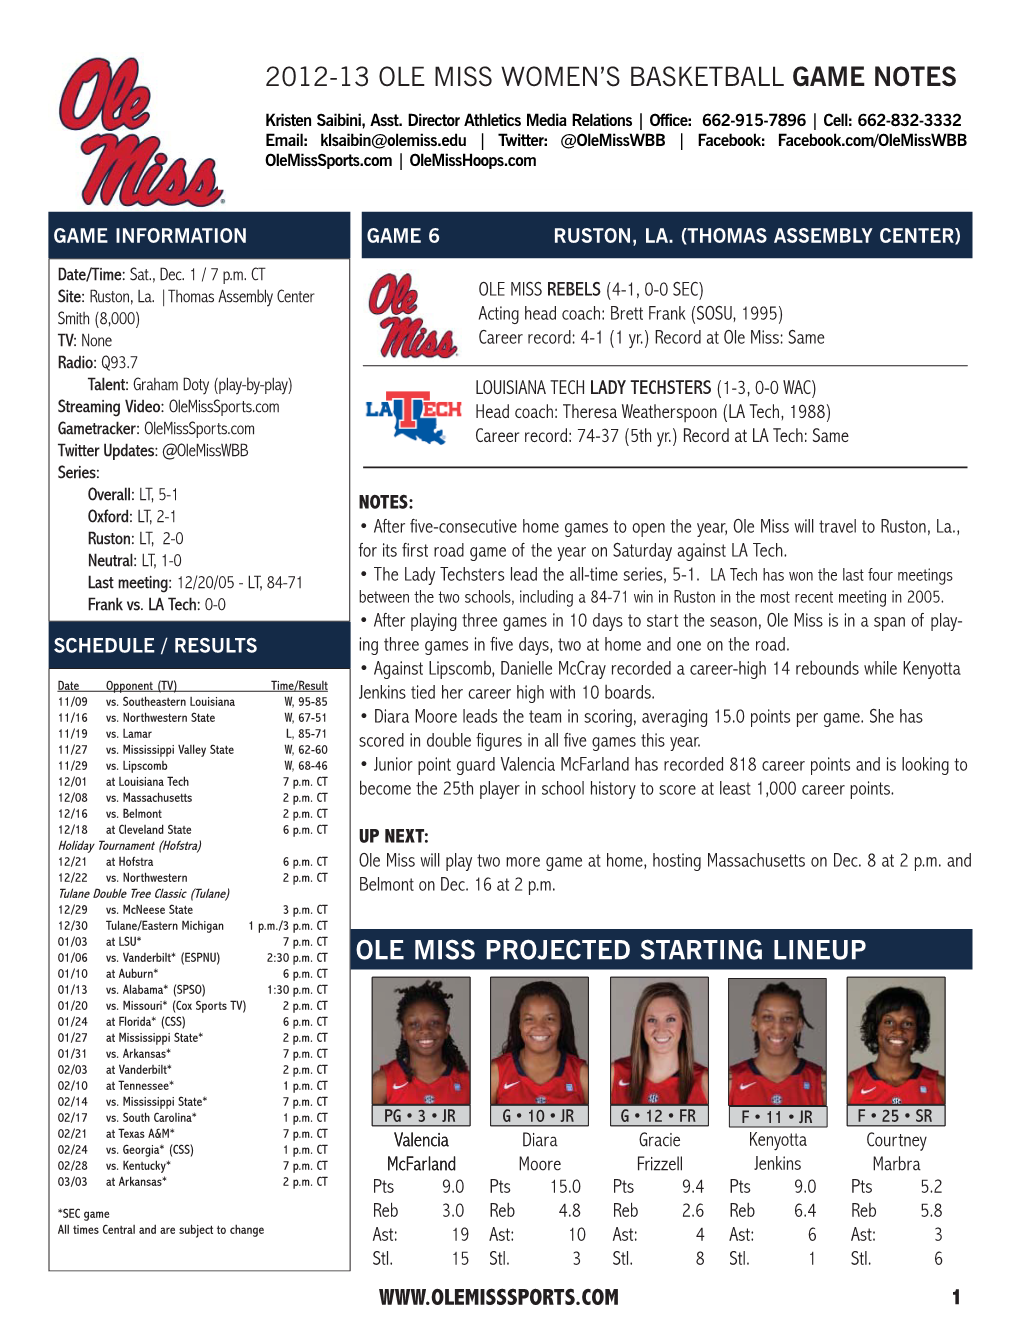 2012-13 Ole Miss Women's Basketball Ole Miss Combined Team Statistics (As of Nov 29, 2012) All Games